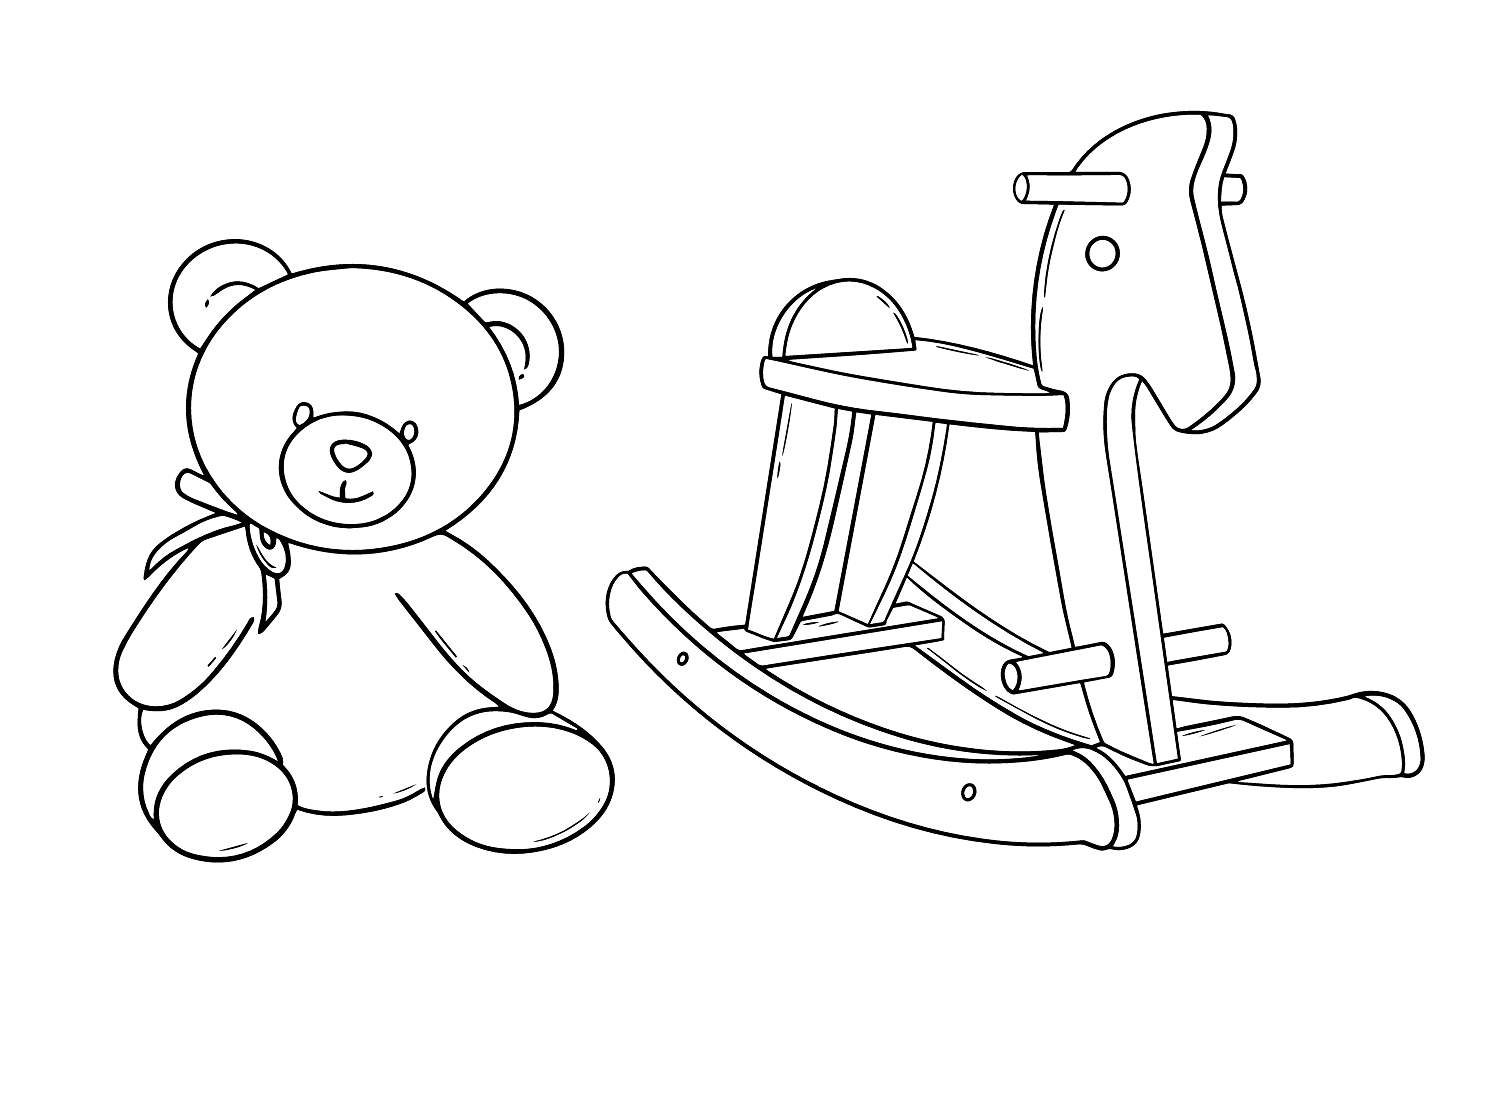 Teddy Bear with Rocking Horse from Toys